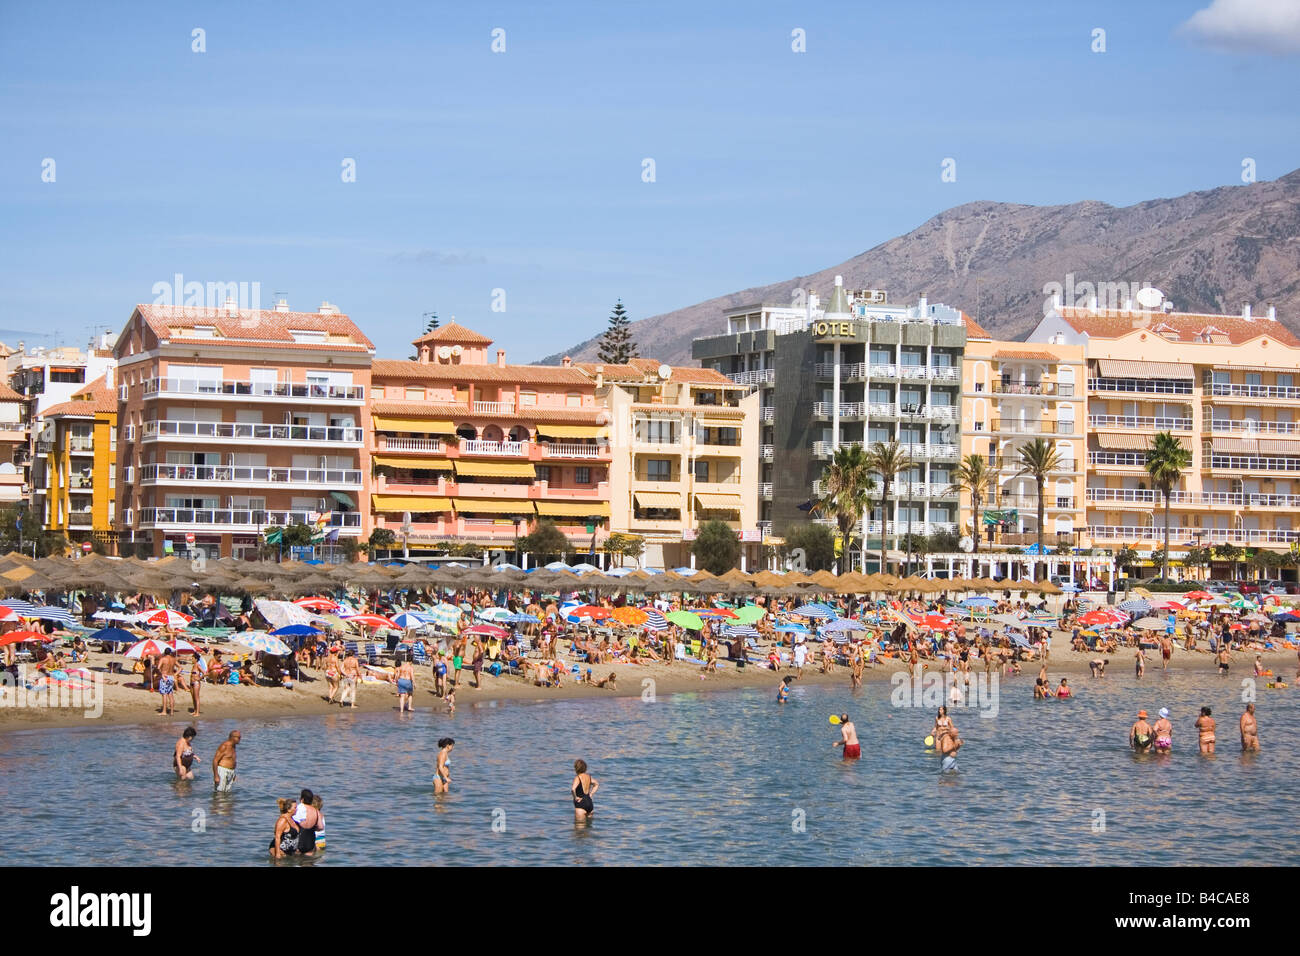 Fuengirola Costa del Sol Malaga Province Spain Crowded beach and paseo Stock Photo